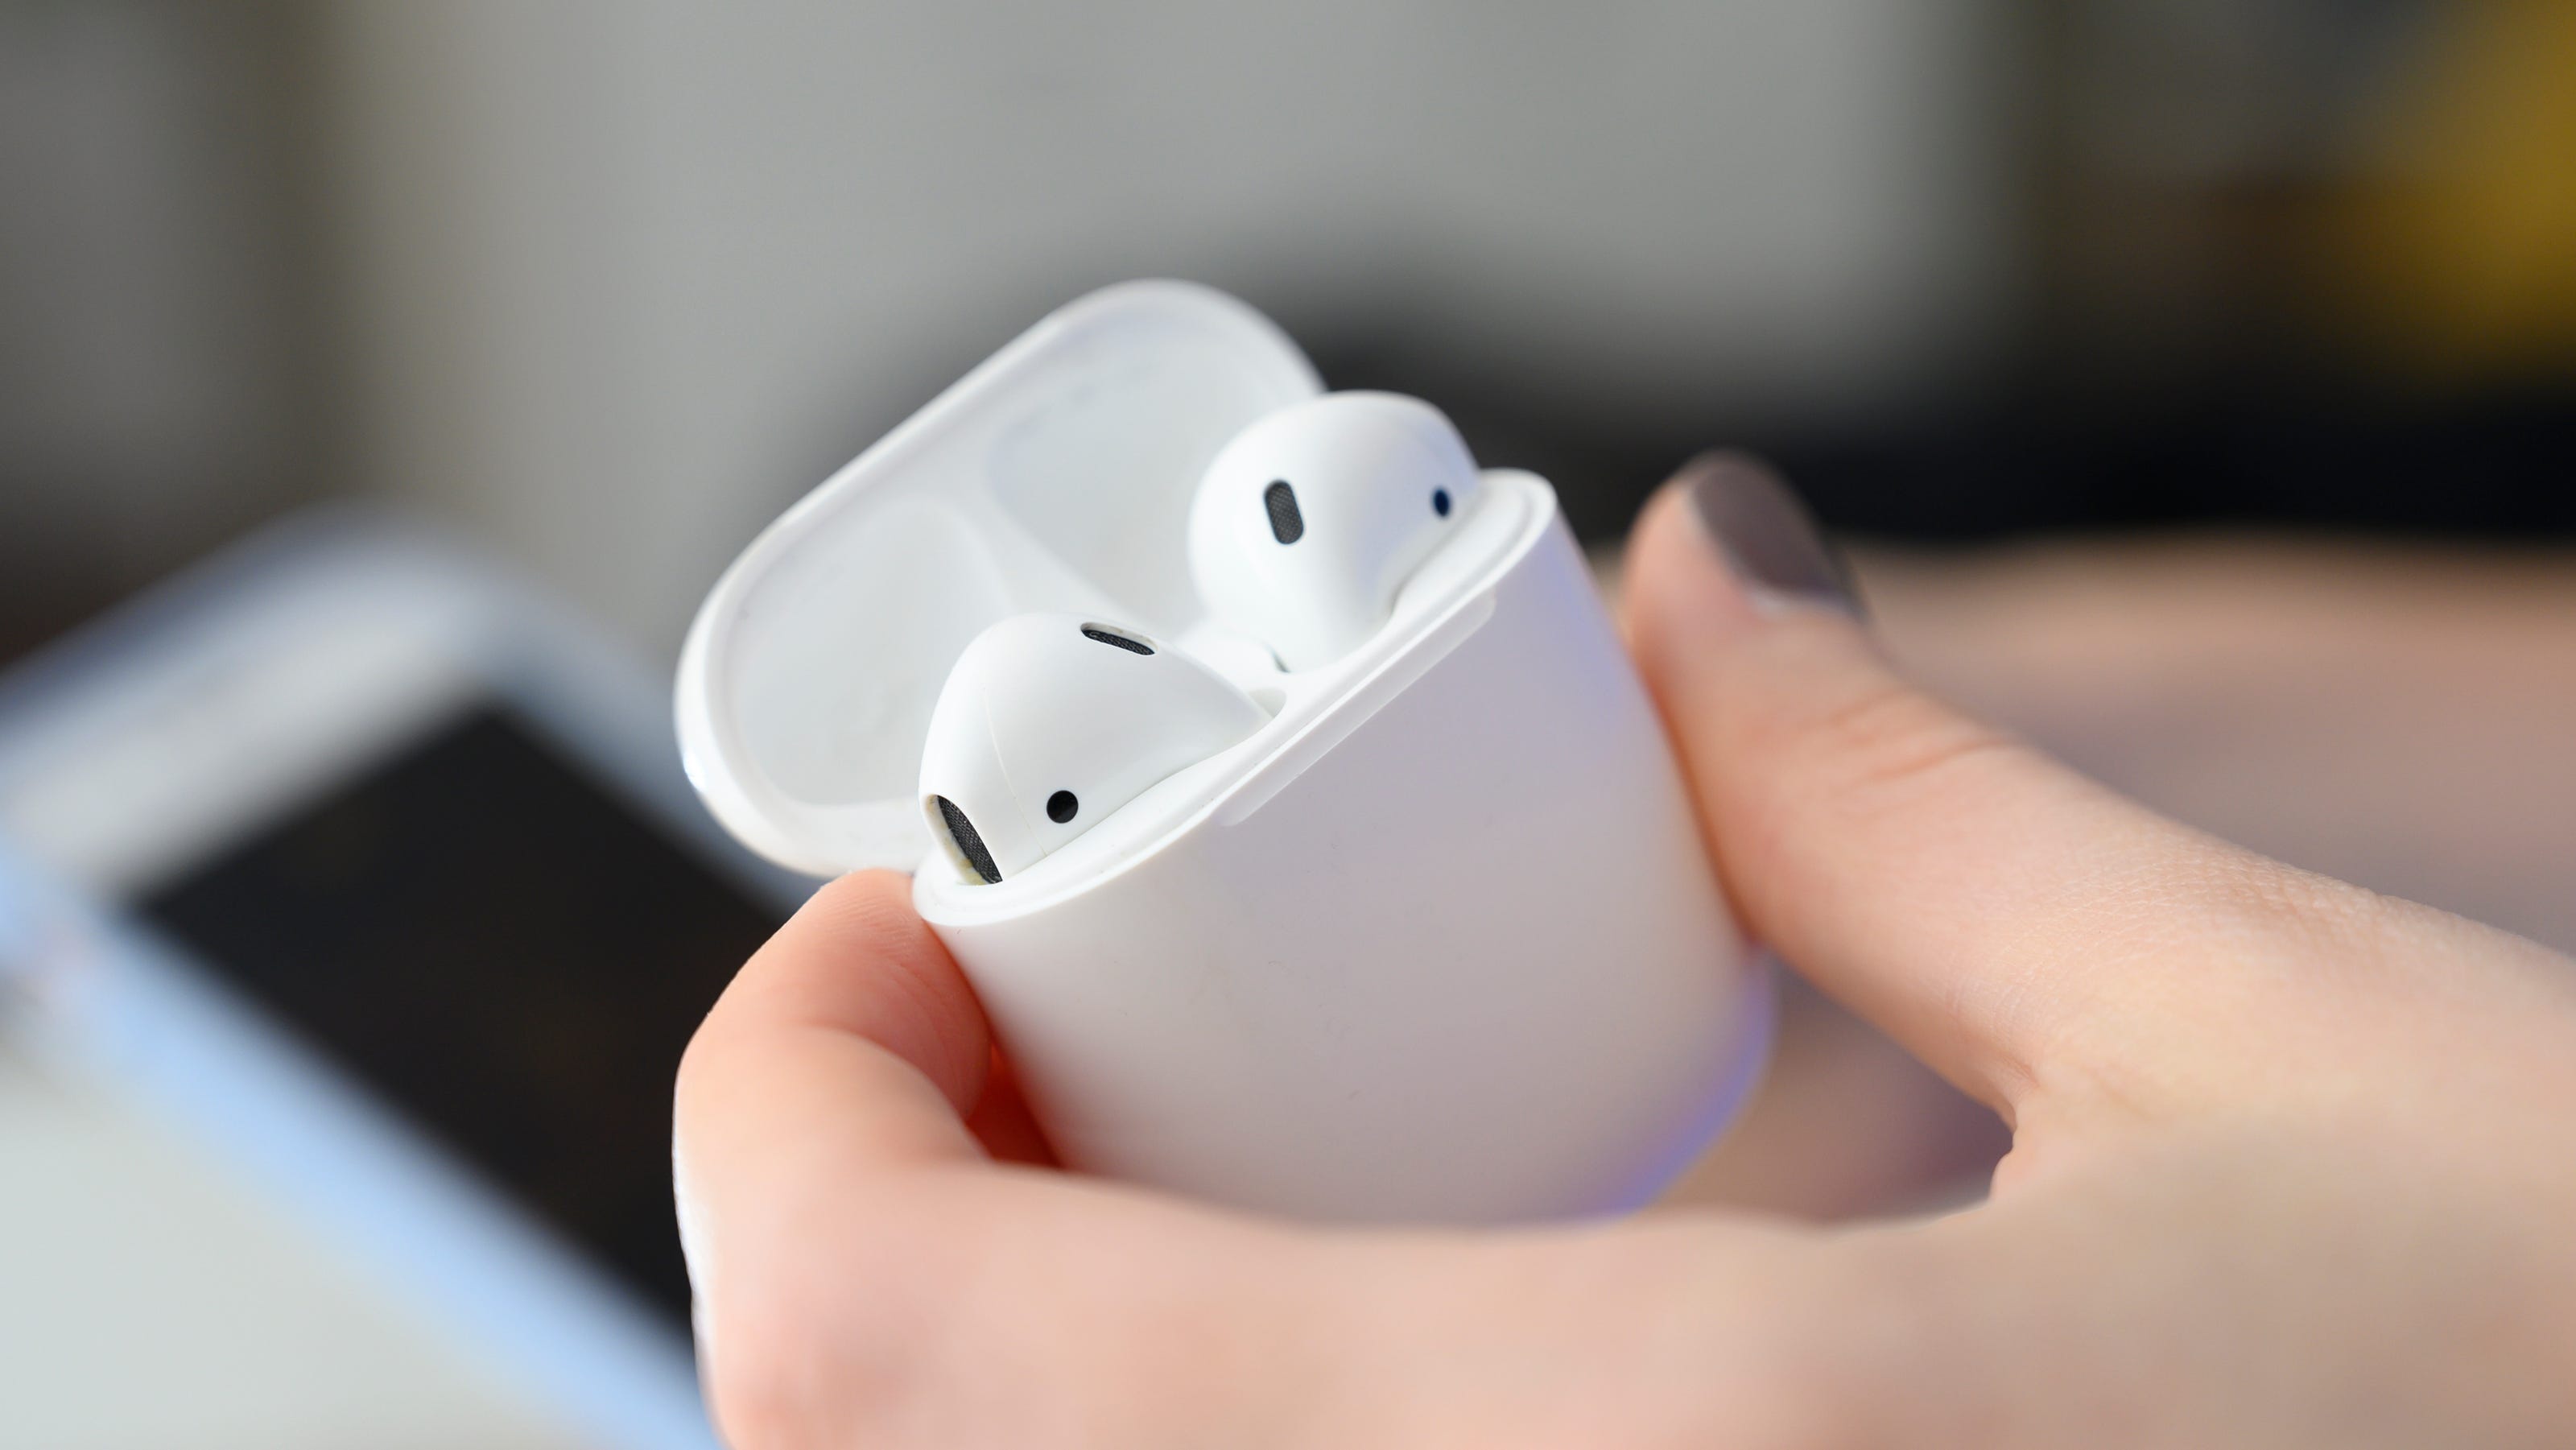 Apple student discount Get free AirPods with this backtoschool promo